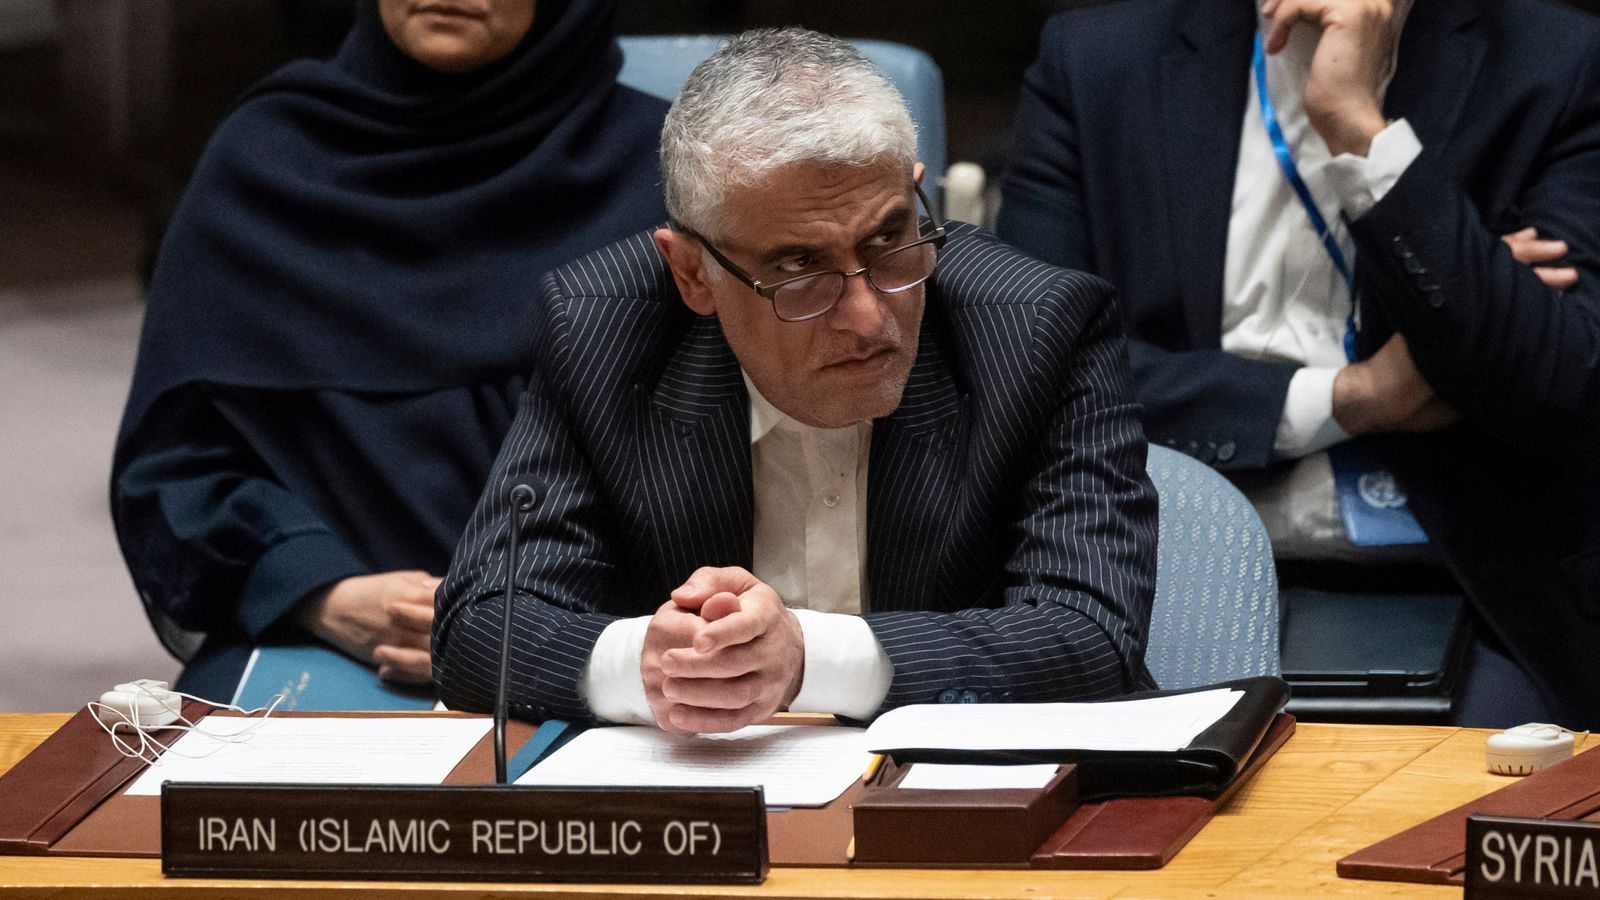 israel 'knows what our second retaliation would be', says iran's un ambassador